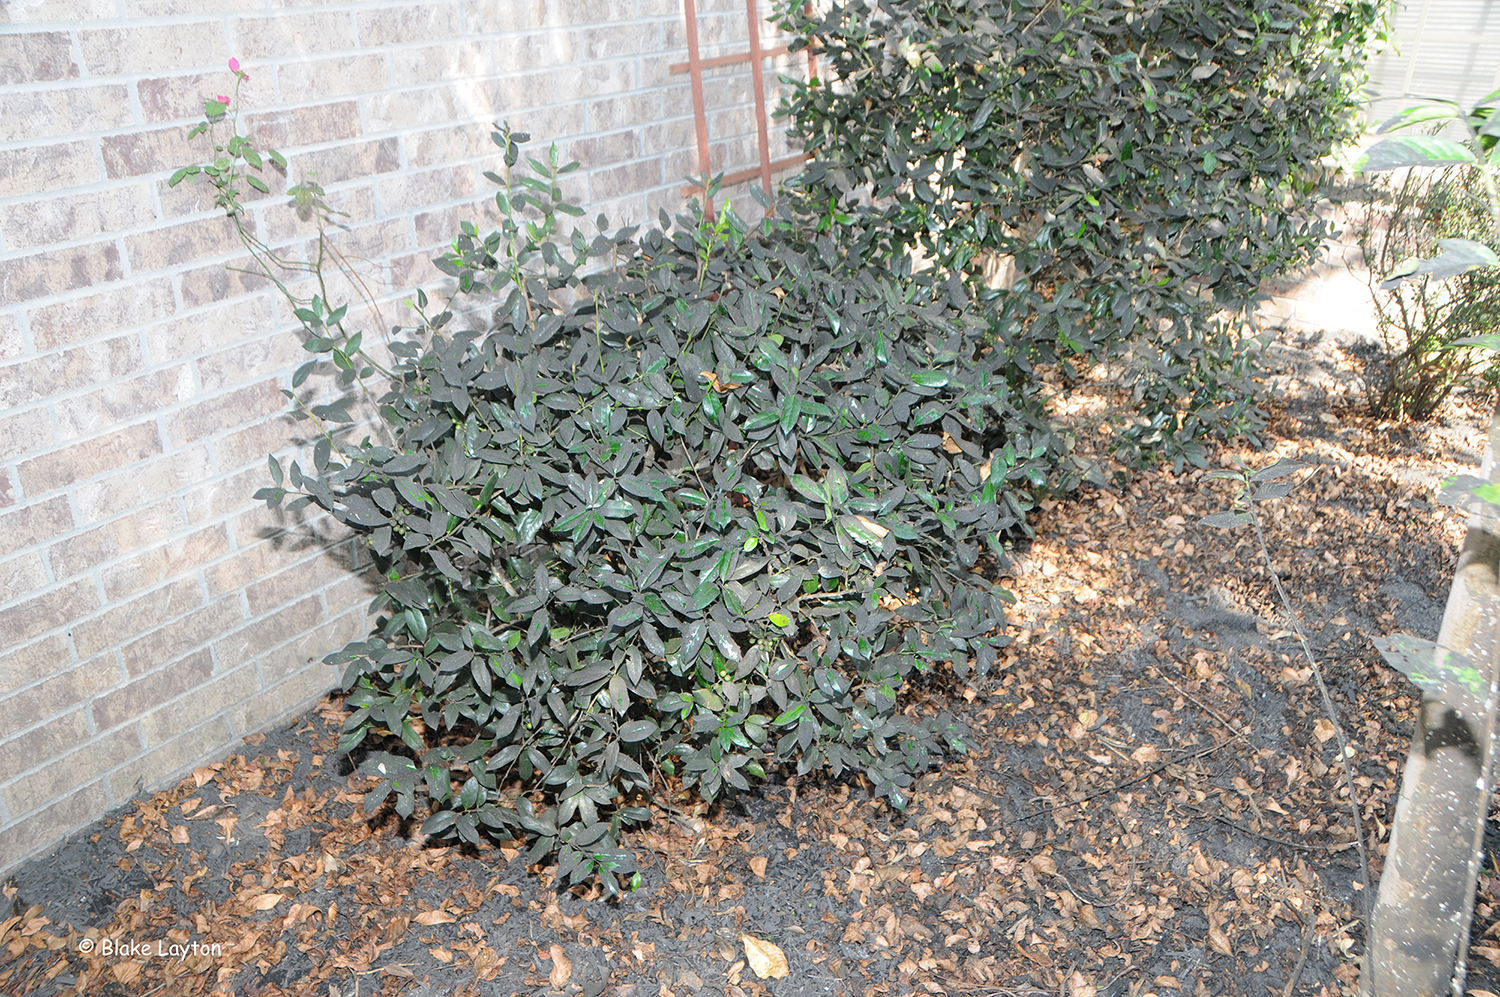 A holly shrub is totally covered with sooty mold and a large crape myrtle is heavily infested with crape myrtle bark scale, and the honeydew produced by these scale fell onto plants growing underneath.